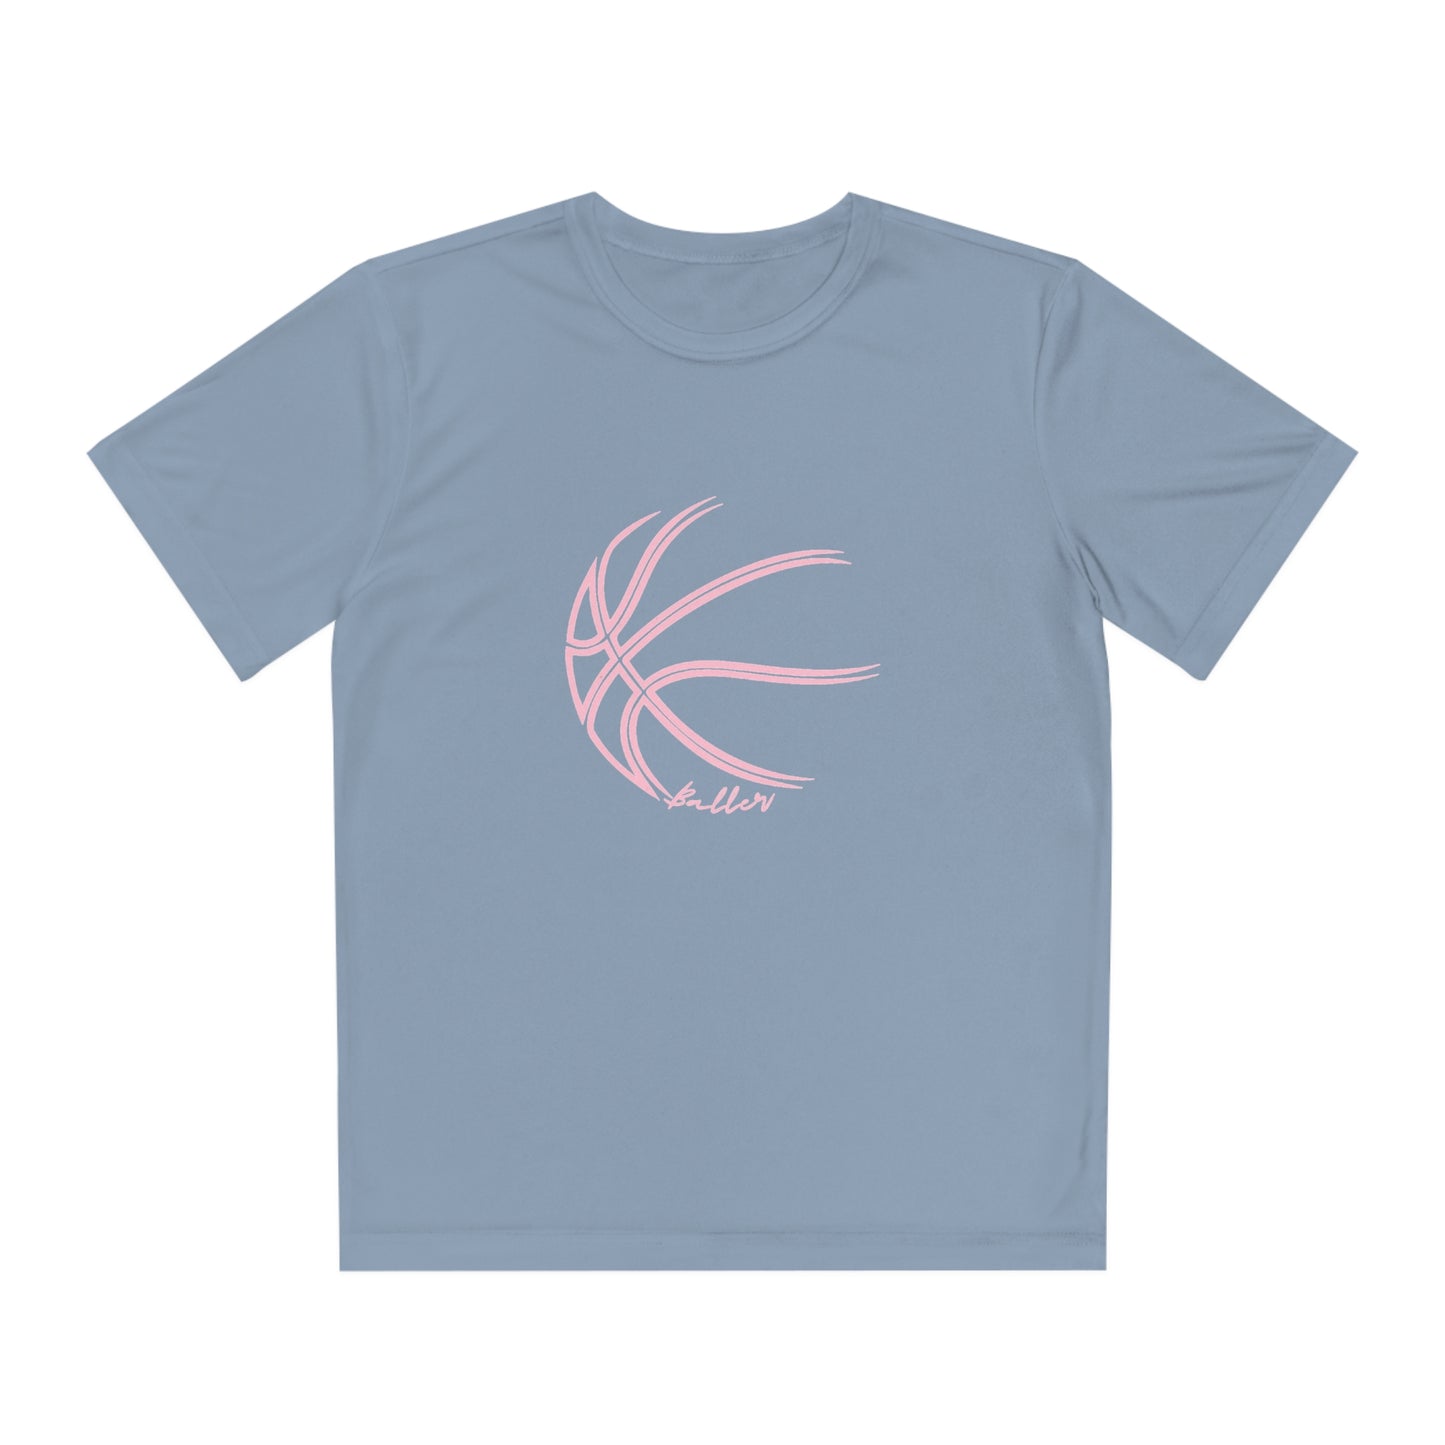 Baller II inspired by Jase & Pierce - Youth Competitor Tee